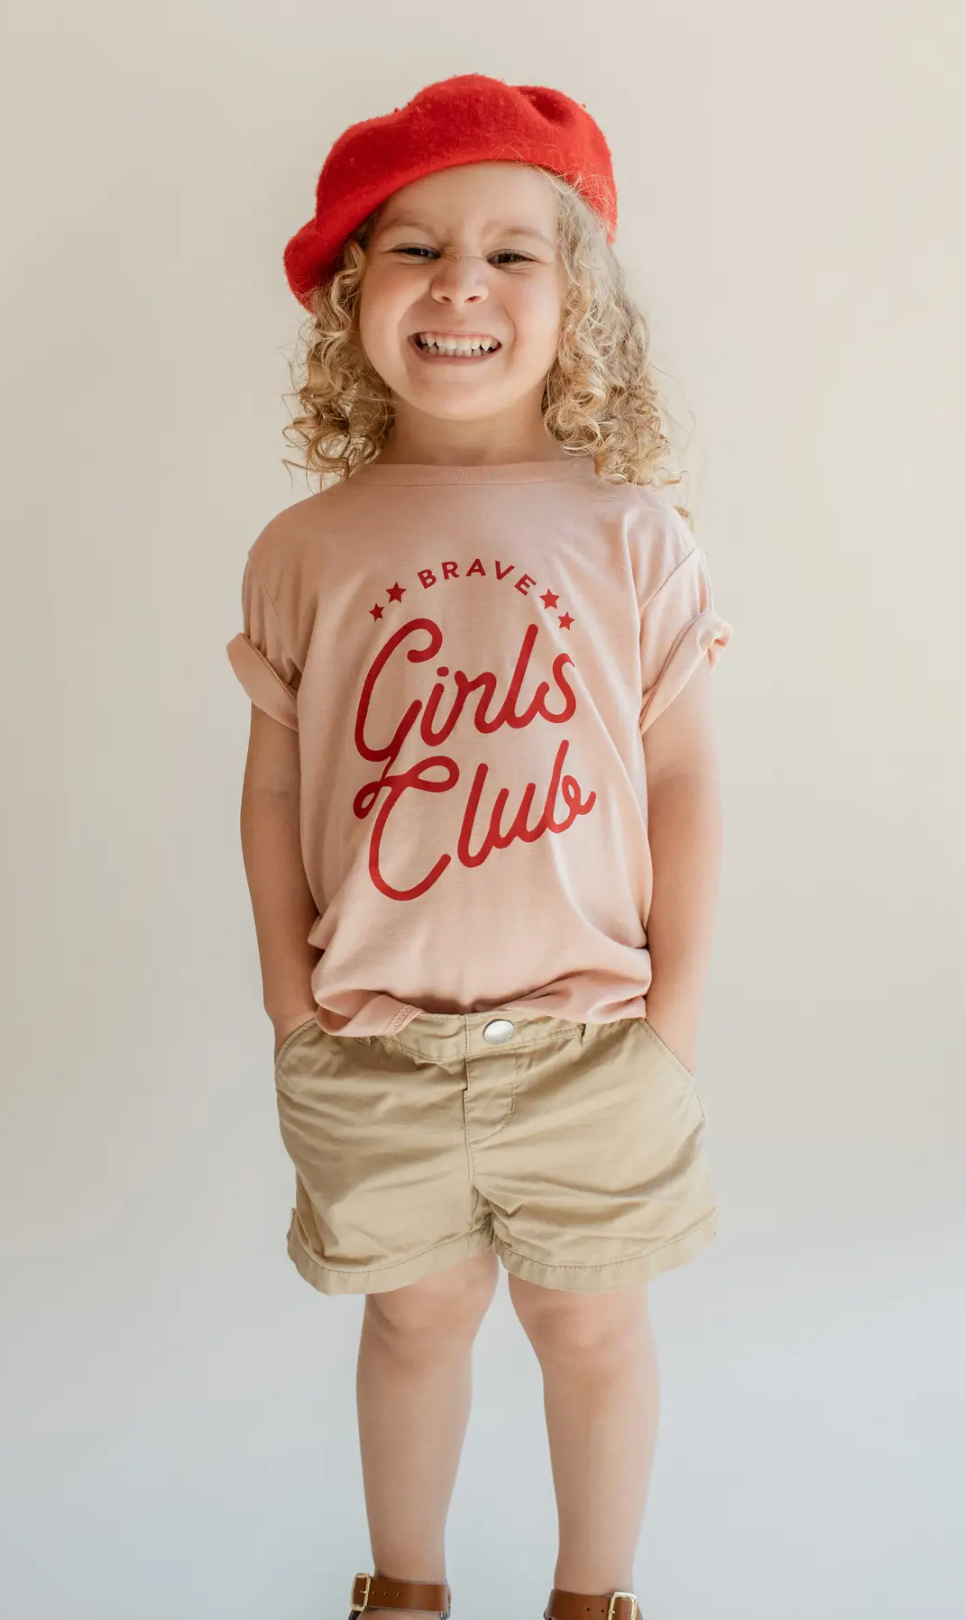 Brave Girls Club, Graphic Tees for Kids